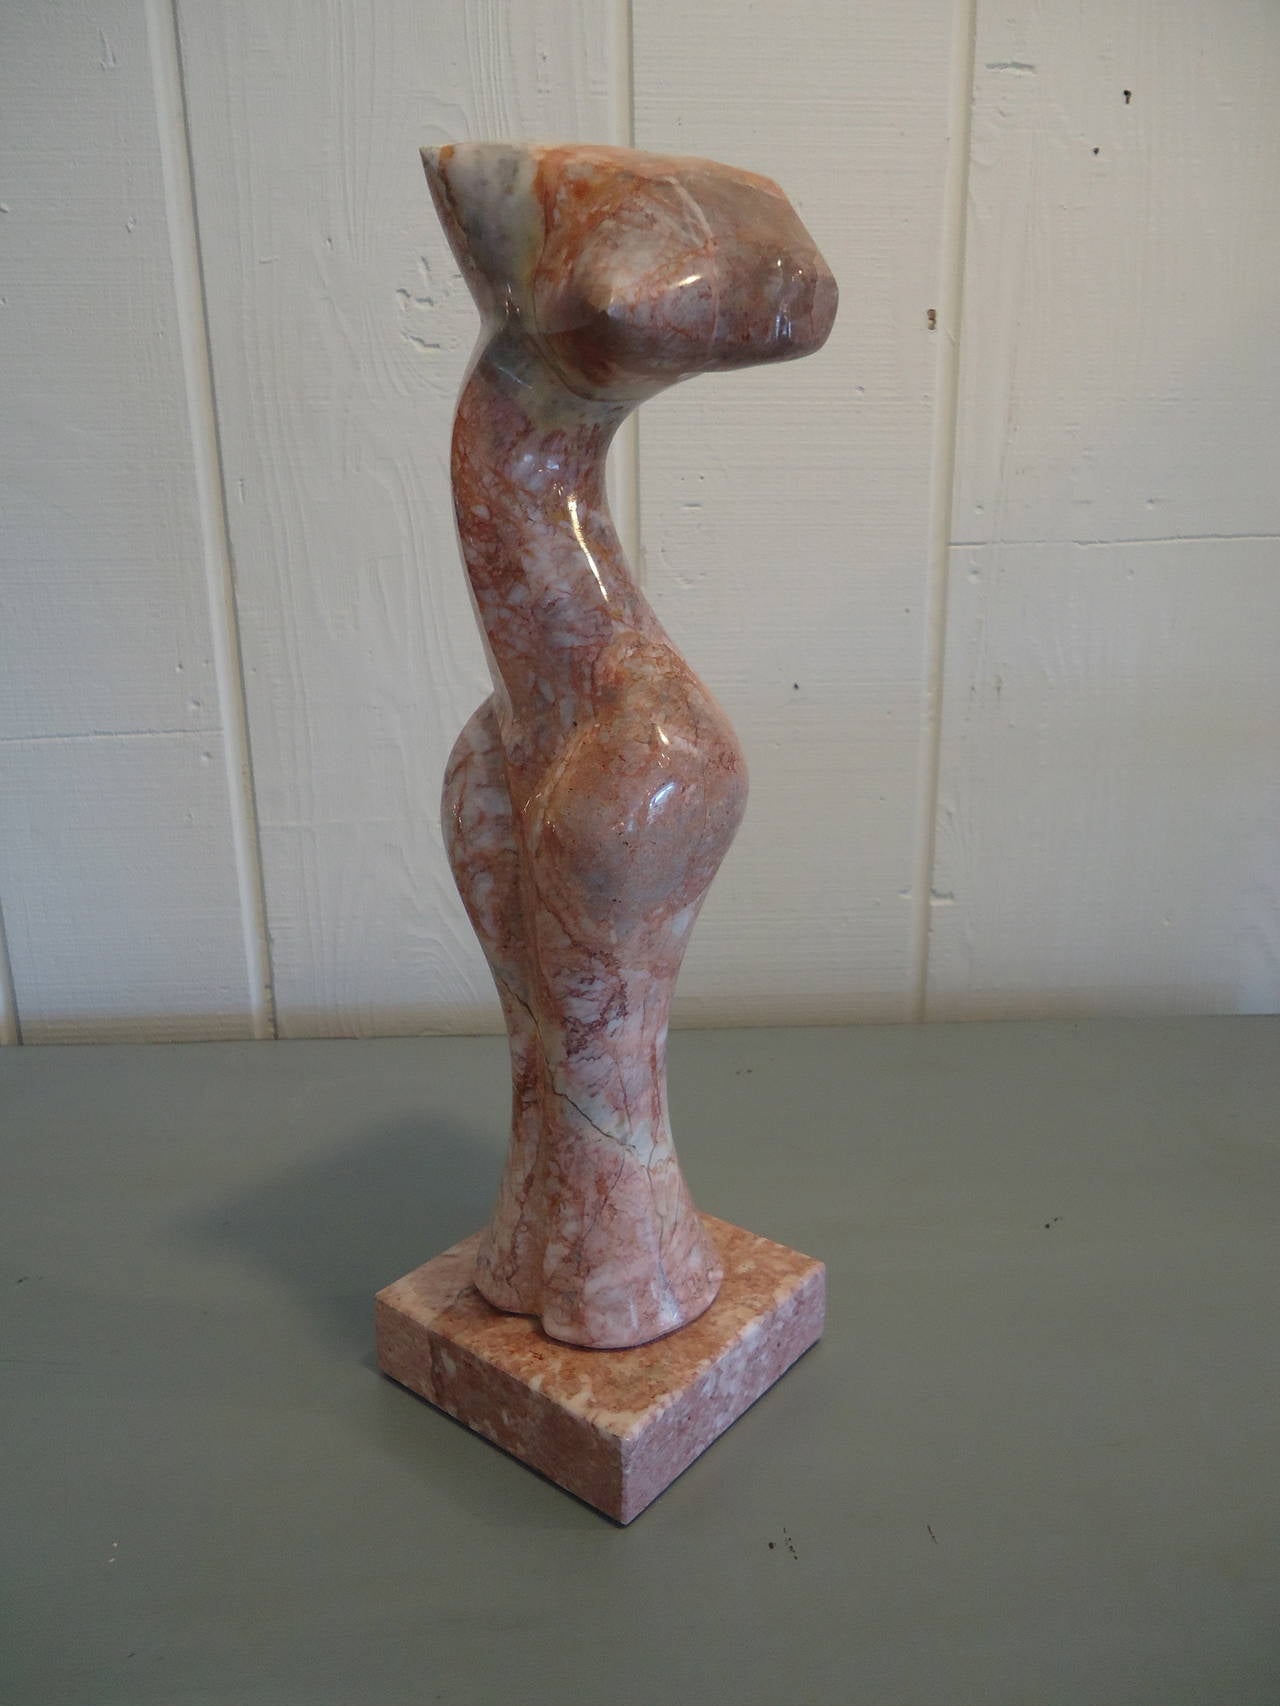 Gorgeous marble in pinks, maroon and cream, artfully sculpted to suggest the female form from every angle. Abstract and eye-catching. No signature.